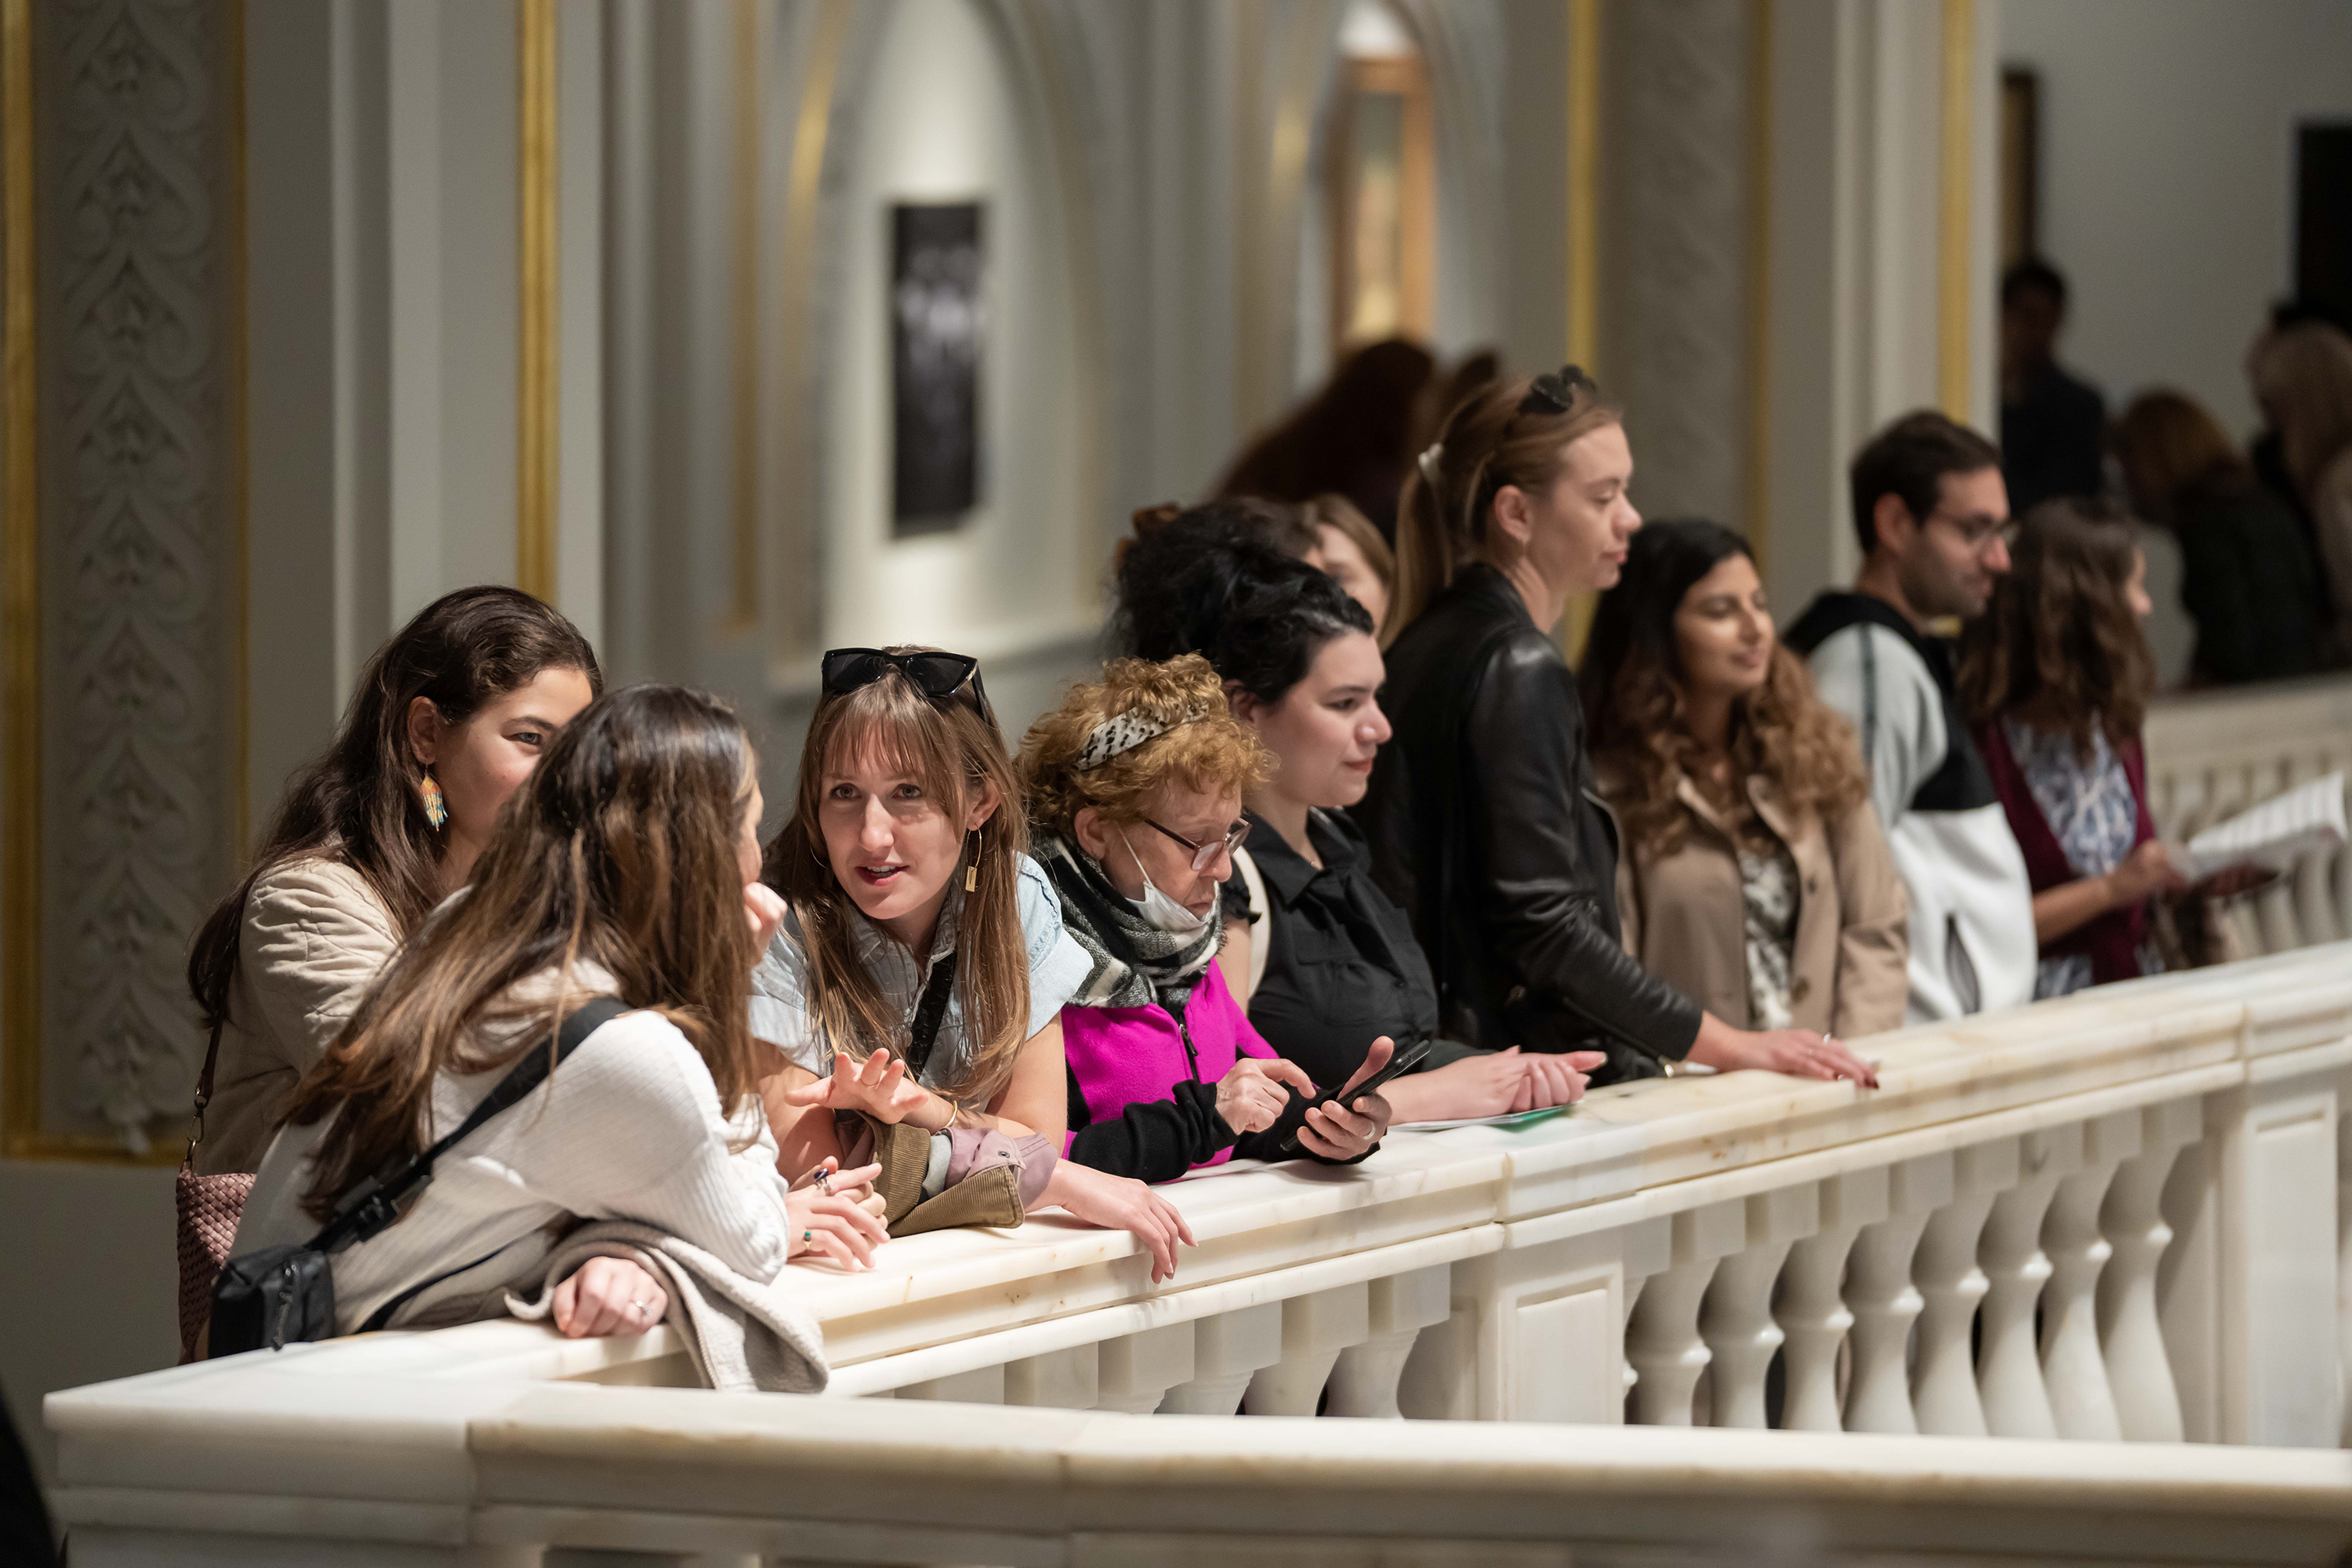 Nine museum visitors of various ages congregate on a marble railing, some chatting, one looking at their phone, and others looking out over the railing.